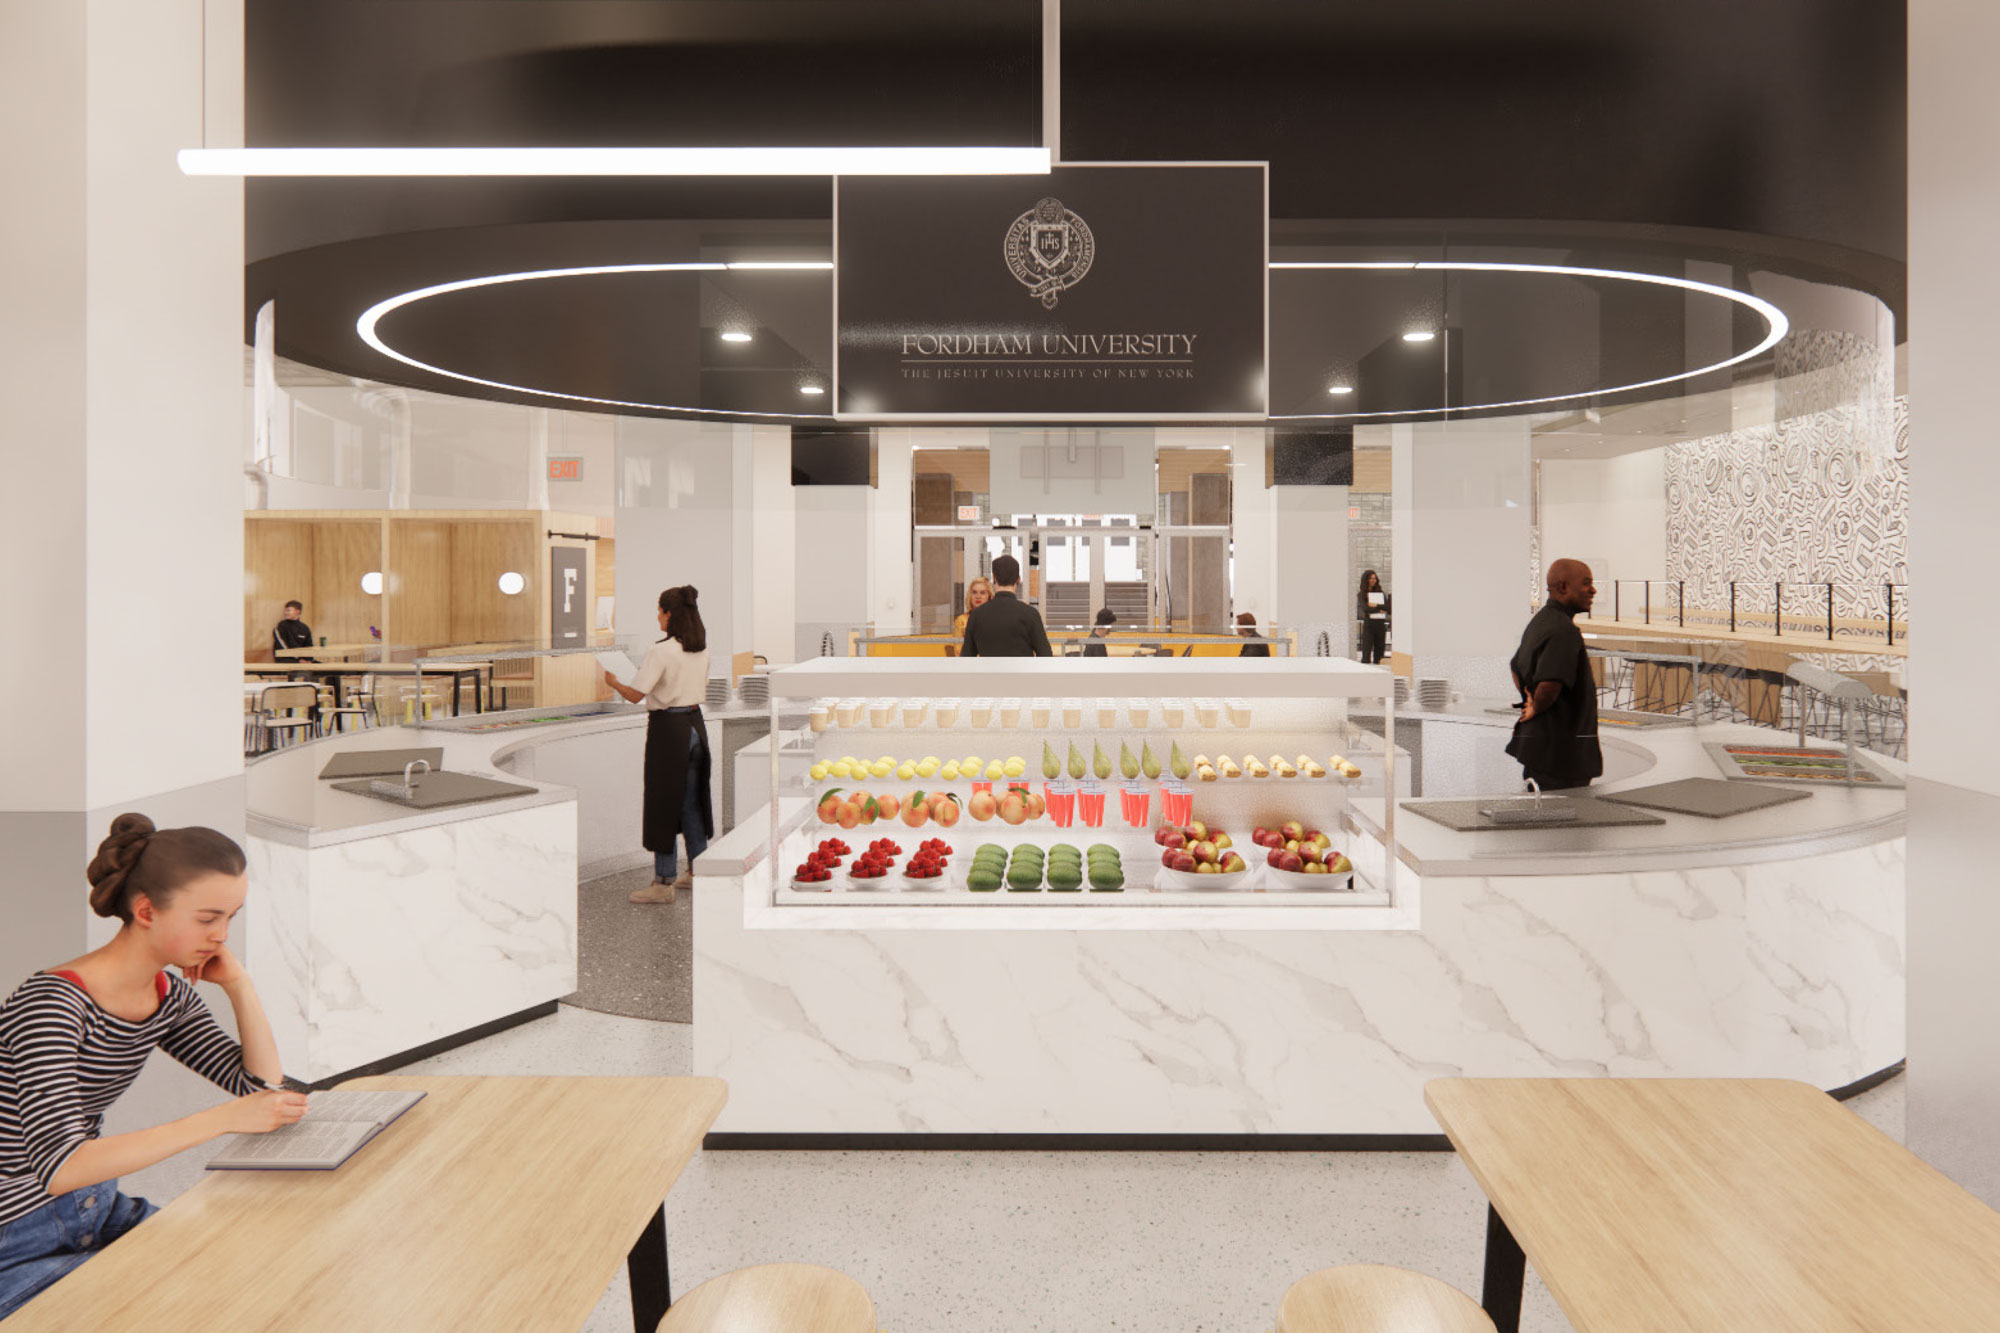 An architect's rendering of what the new marketplace's vegan section will look like.